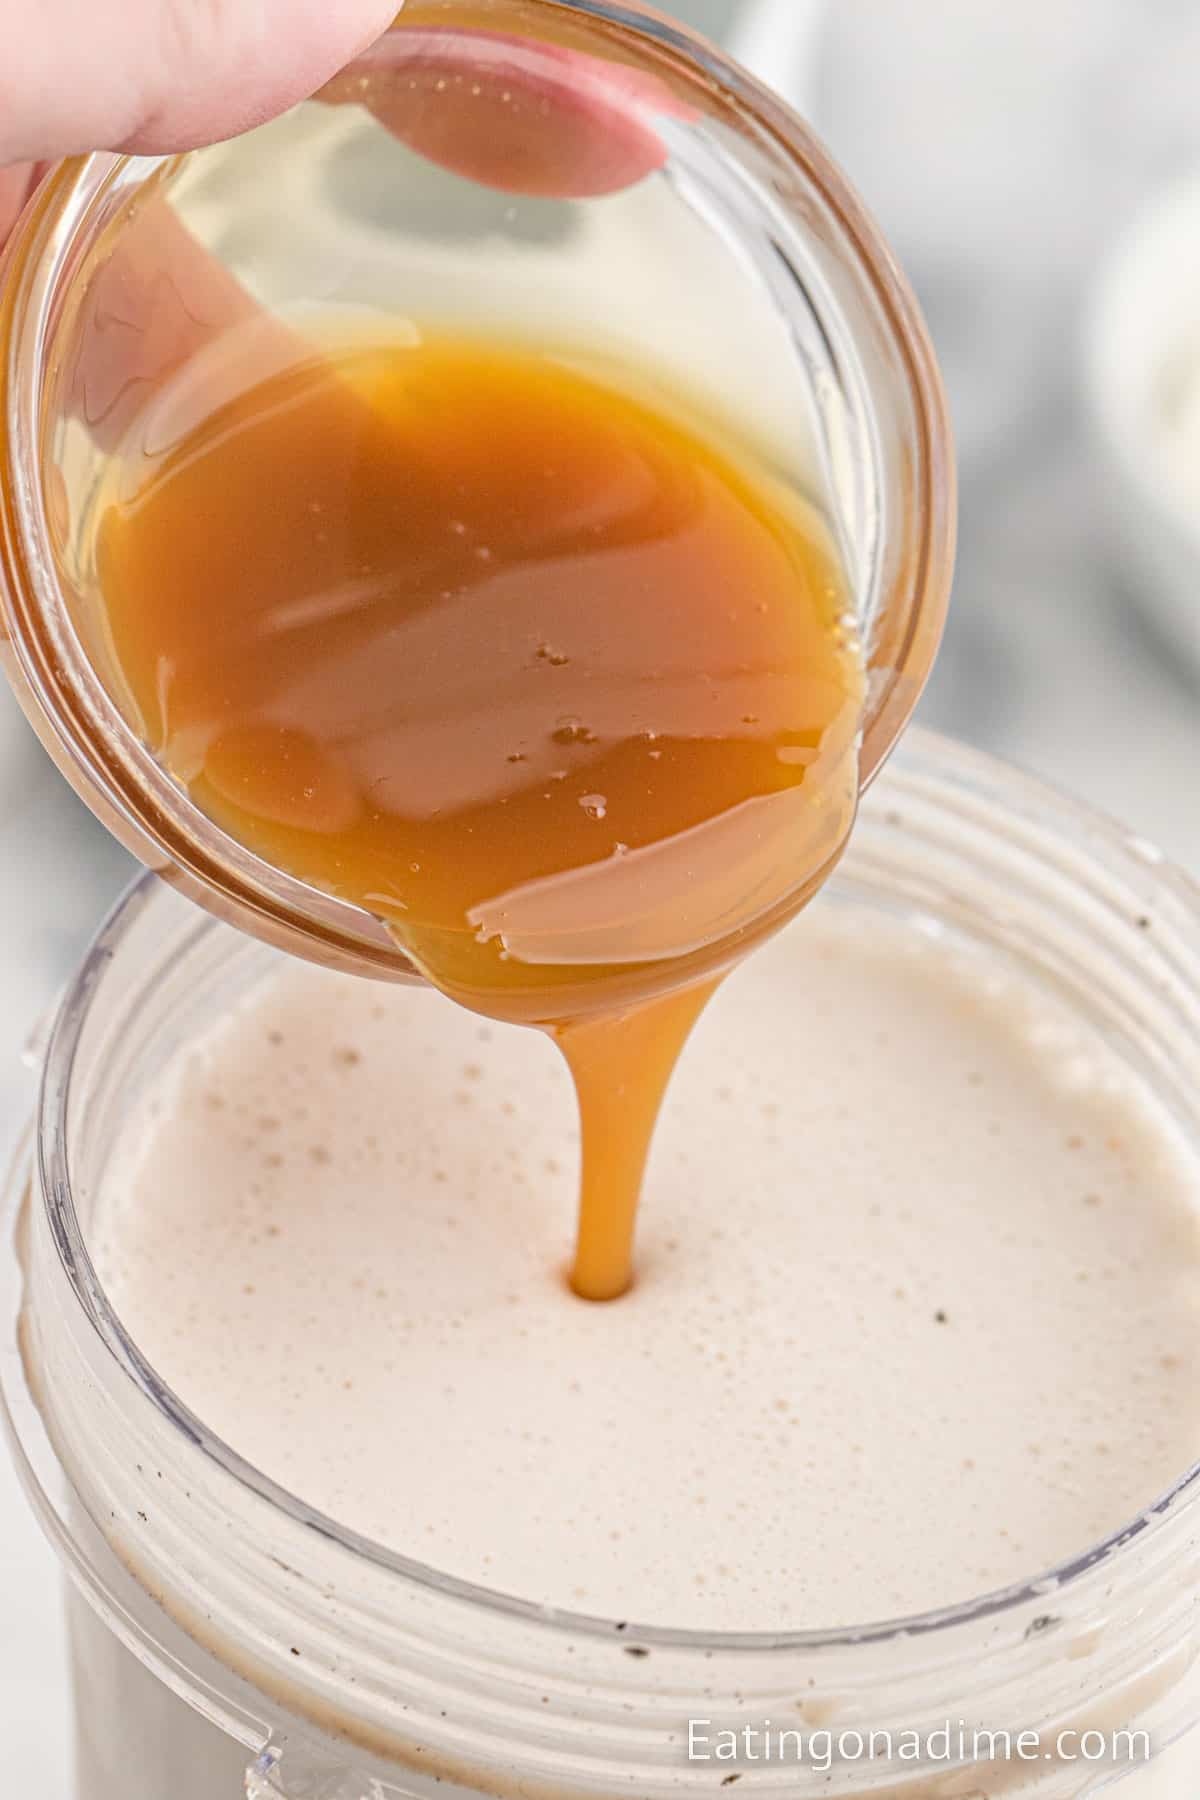 Pouring caramel sauce in the blended coffee mixture